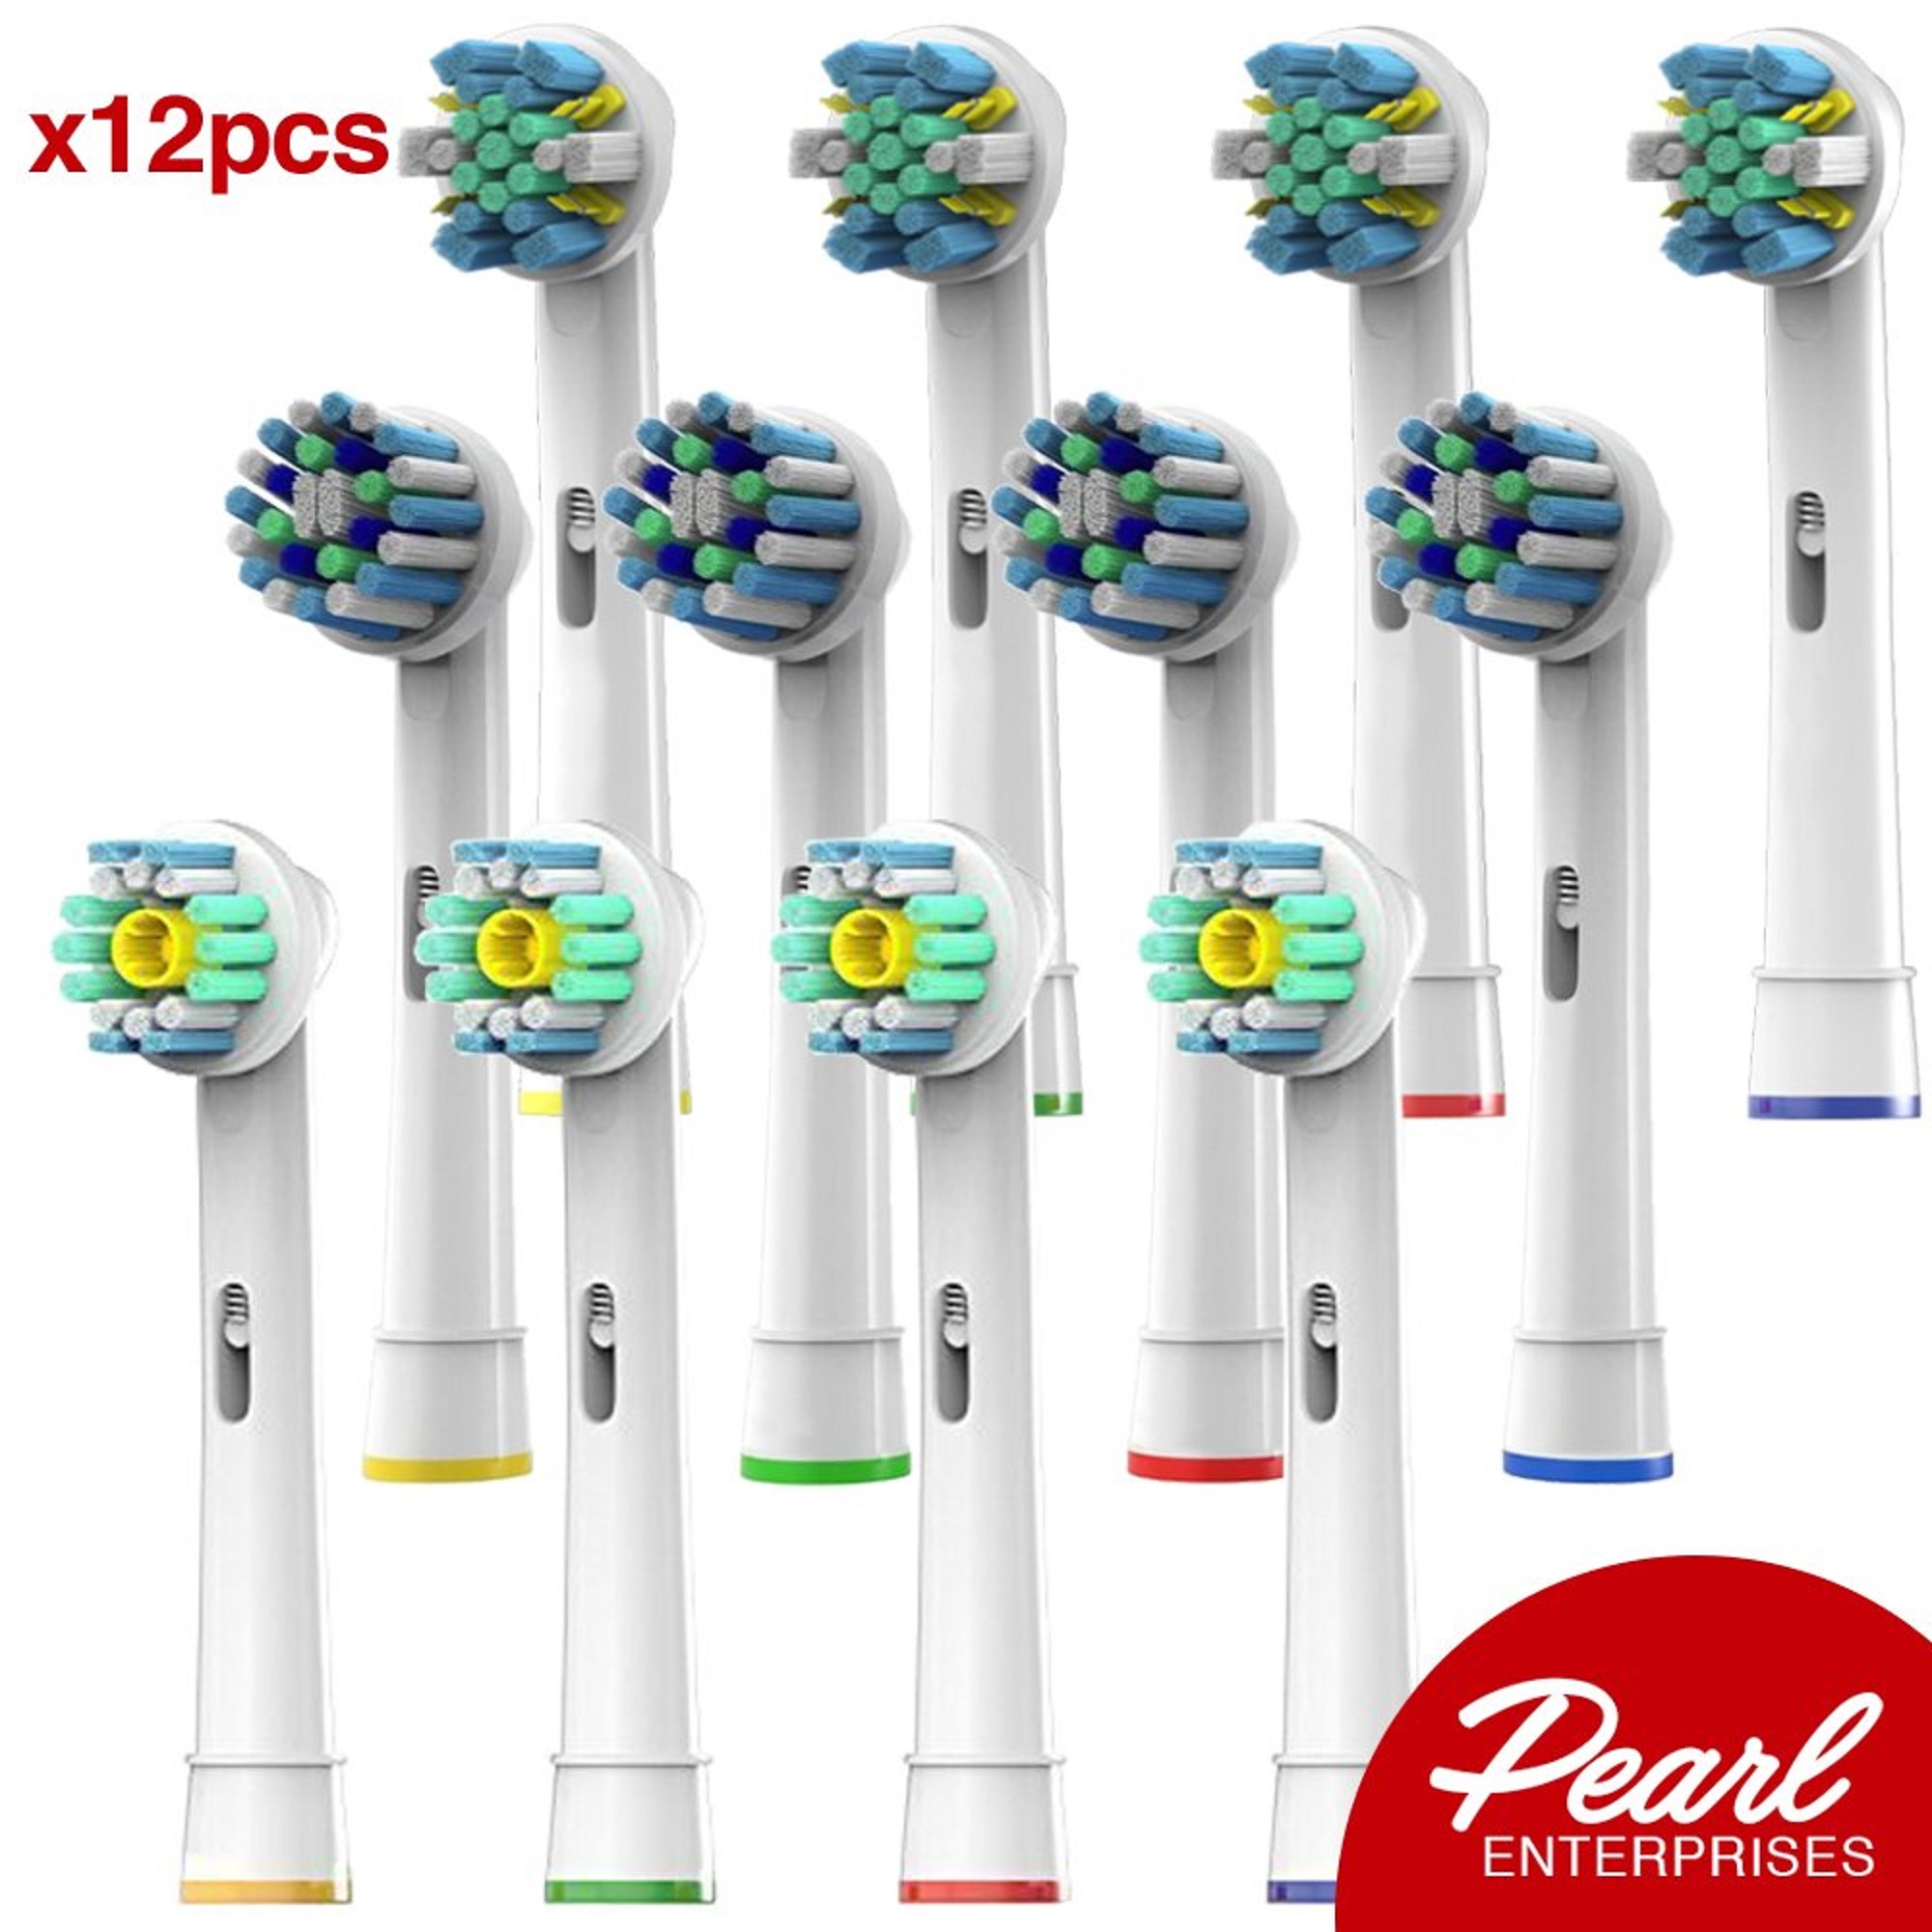 Replacement Brush Heads Compatible with Oral B Braun Electric Toothbrush 12 pk Assorted Action Style, 4 Floss, 4 Cross, 4 Pro White Fits Oralb Braun Pro 7000, 1000, 8000, 9000, 1500,5000,Kids,Vitality - image 1 of 9